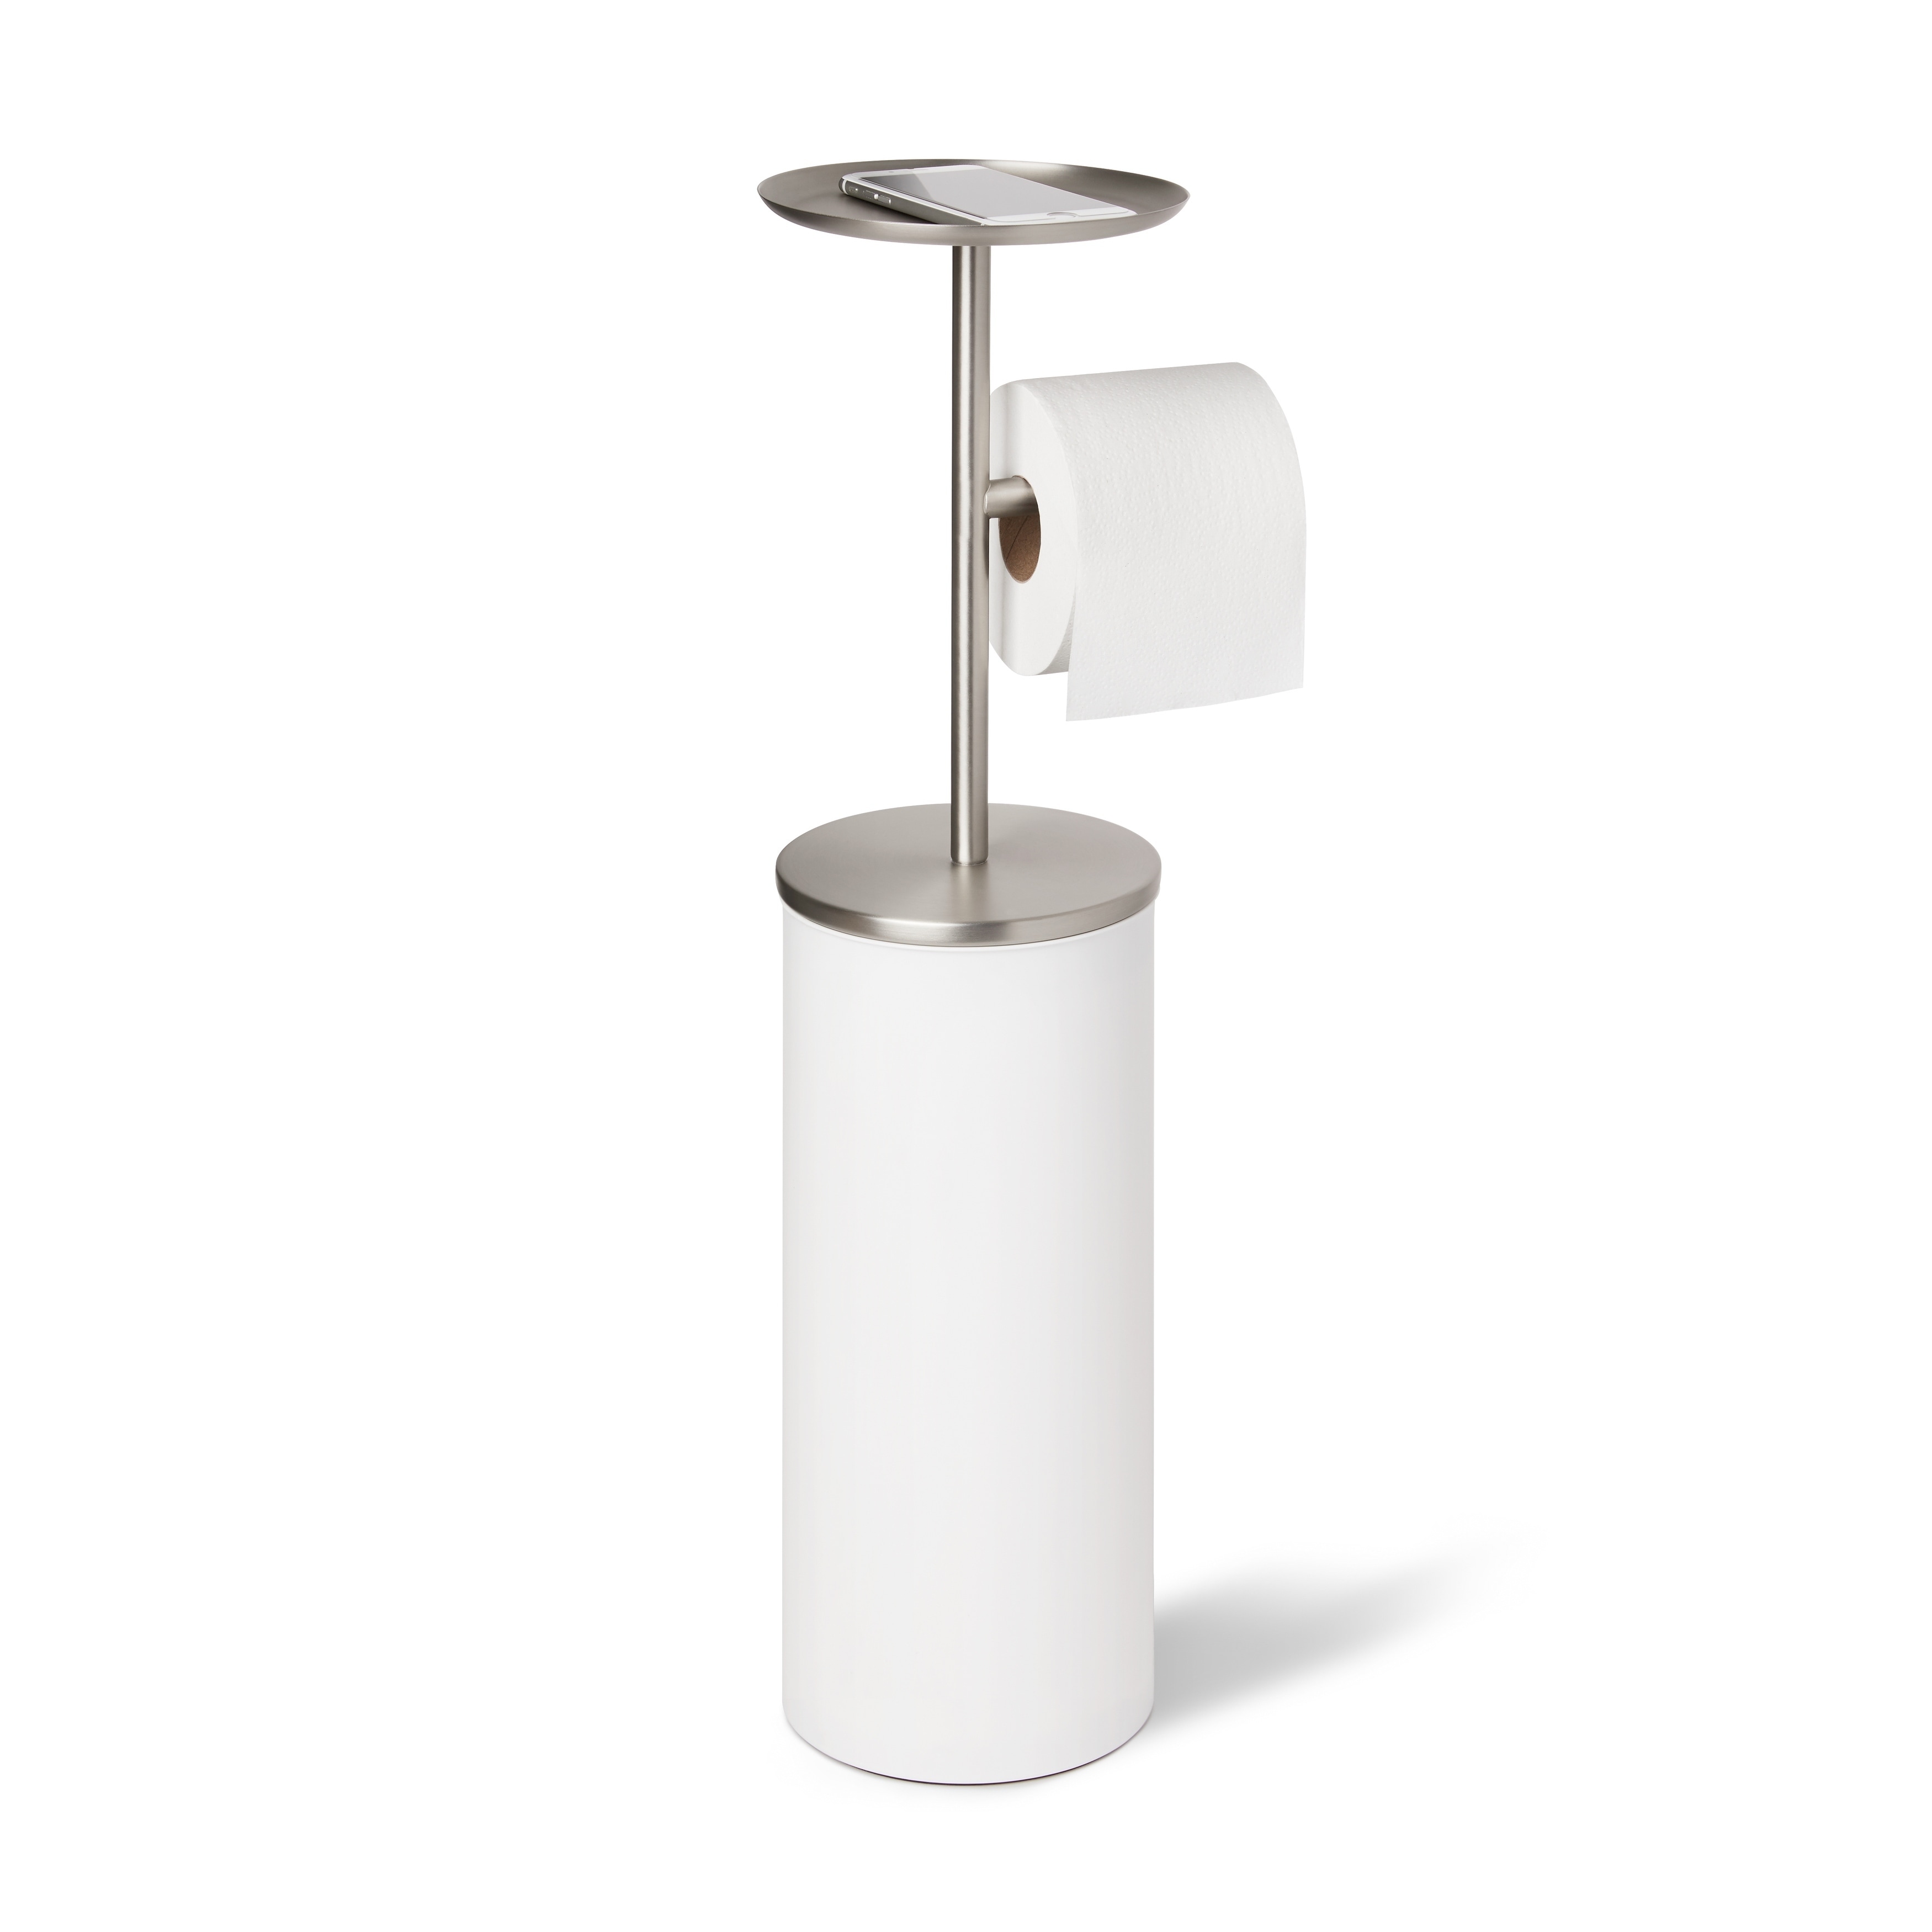 Portaloo Toilet Paper Stand White/Nickel - On Sale - Bed Bath & Beyond -  31047547